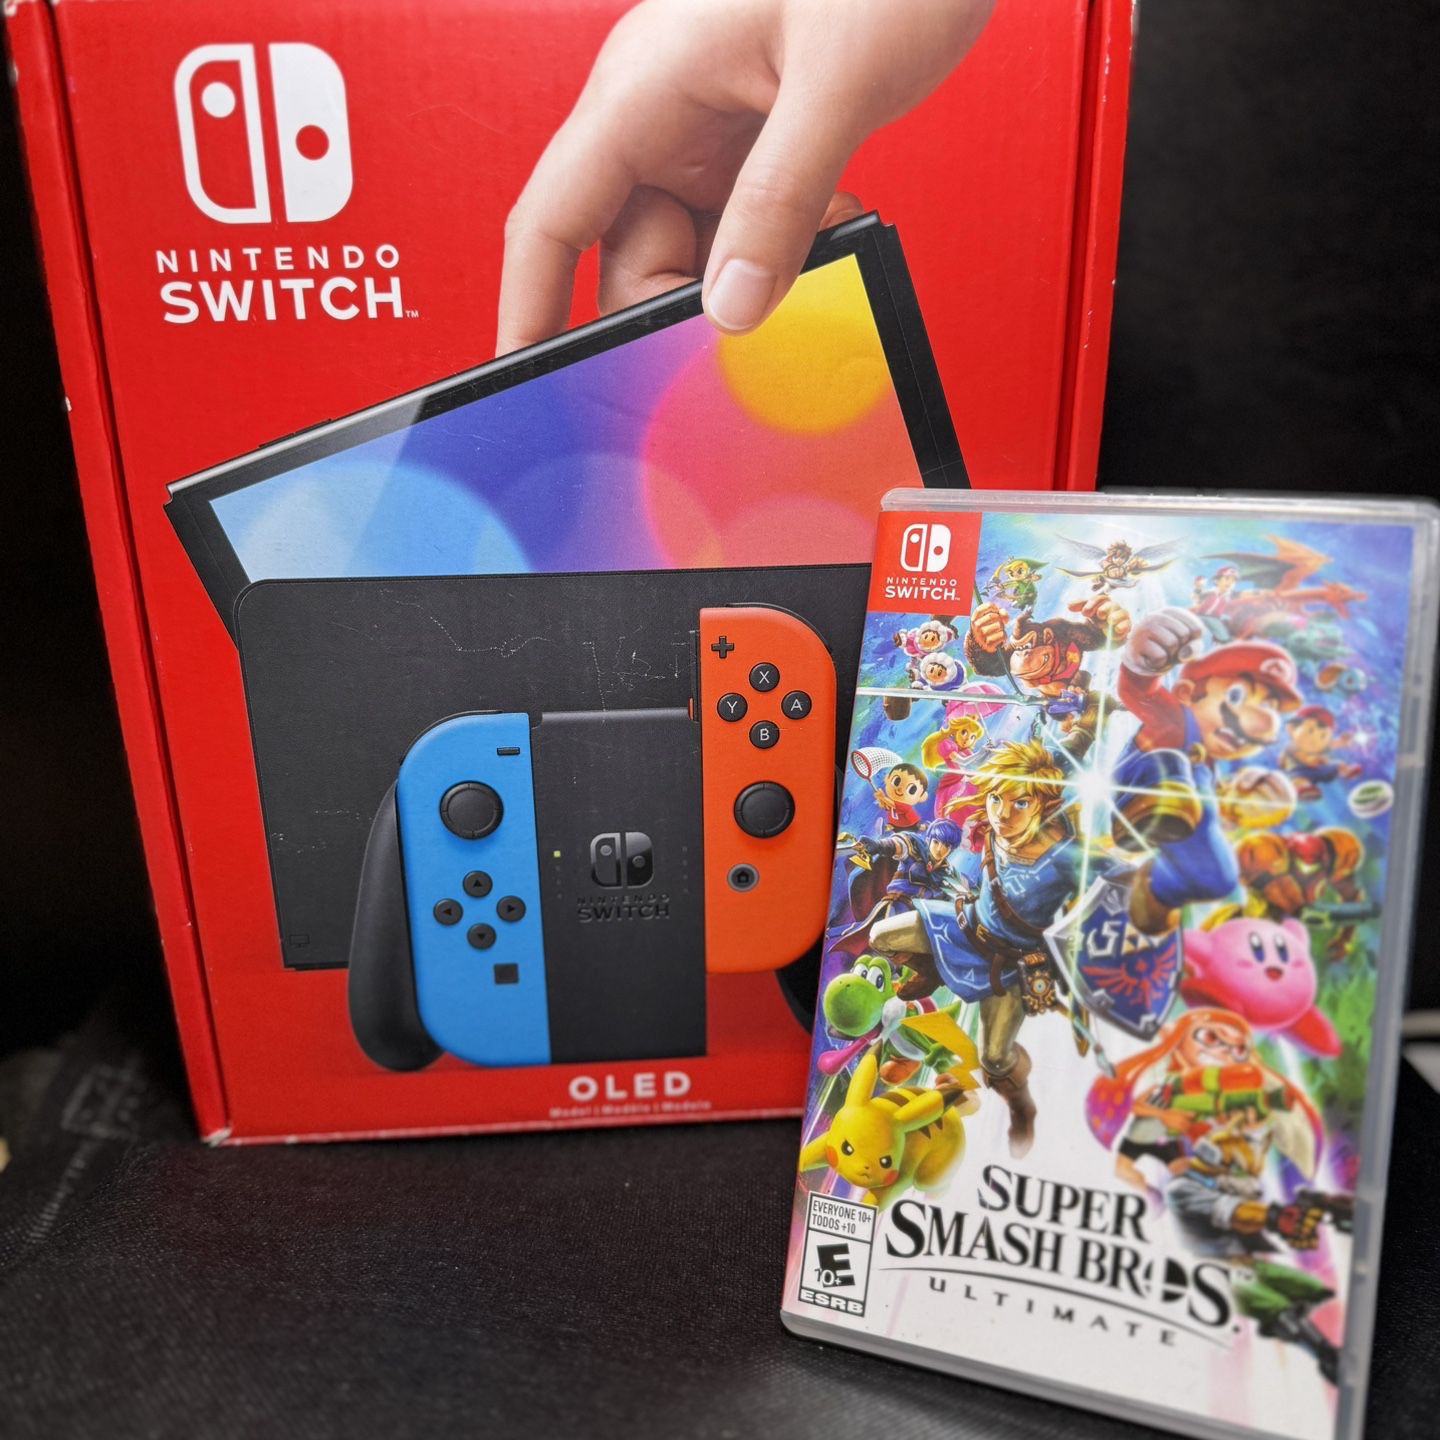 TRADE ONLY FOR OLD VIDEO GAMES Nintendo Switch Oled -LIKE NEW W/ 128 GB Memroy Card and Super Smash Bros Ultimate!!